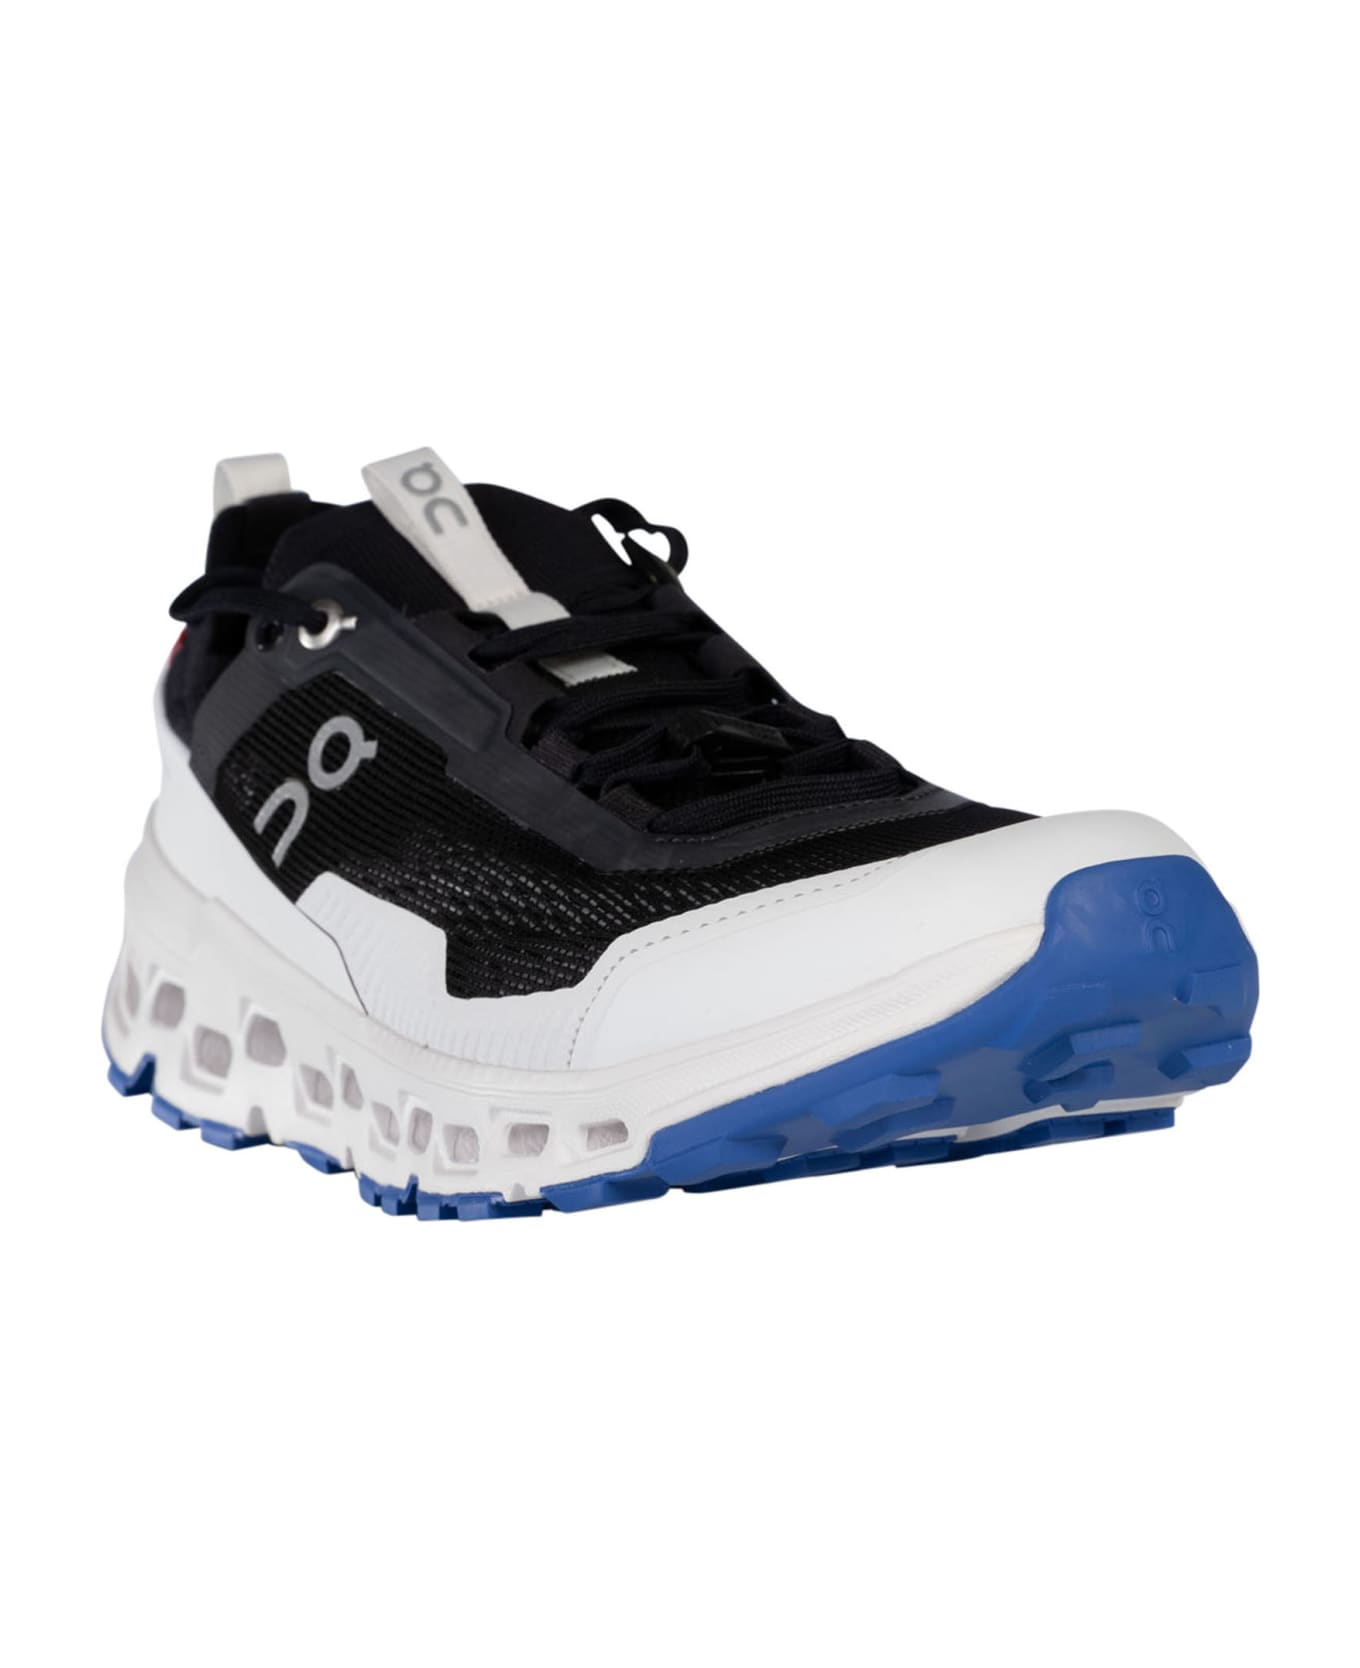 ON Cloudultra2 Sneakers - Black/White スニーカー